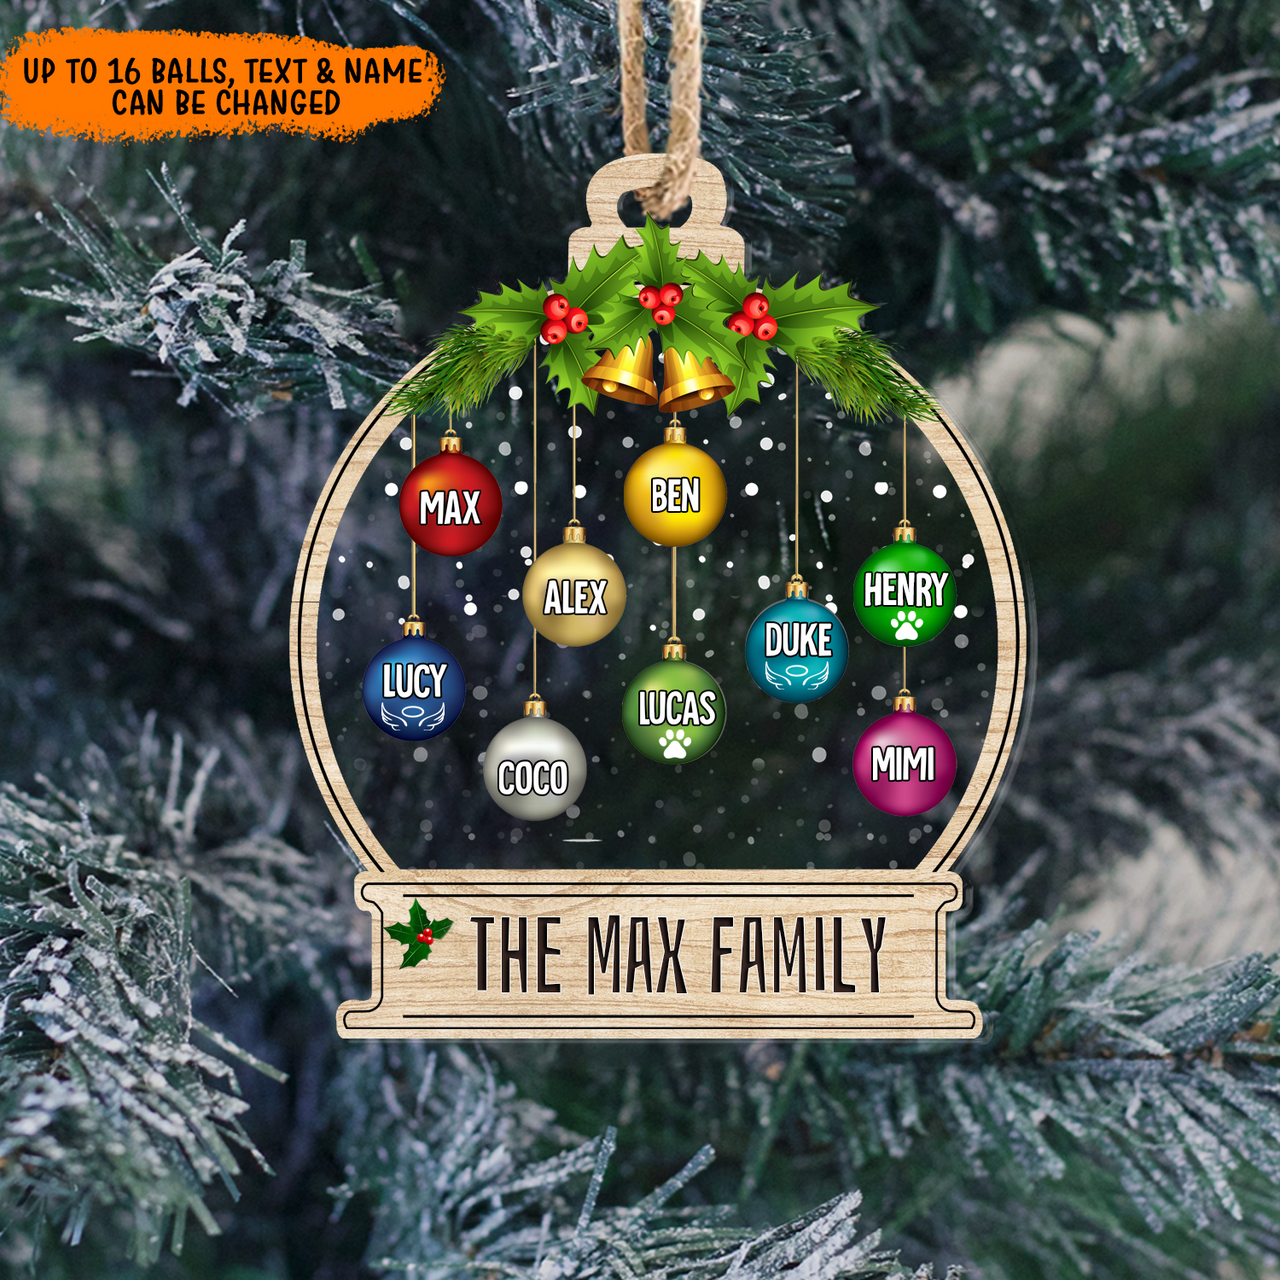 Personalized Christmas Ornaments, Custom Ball Ornaments, Holiday